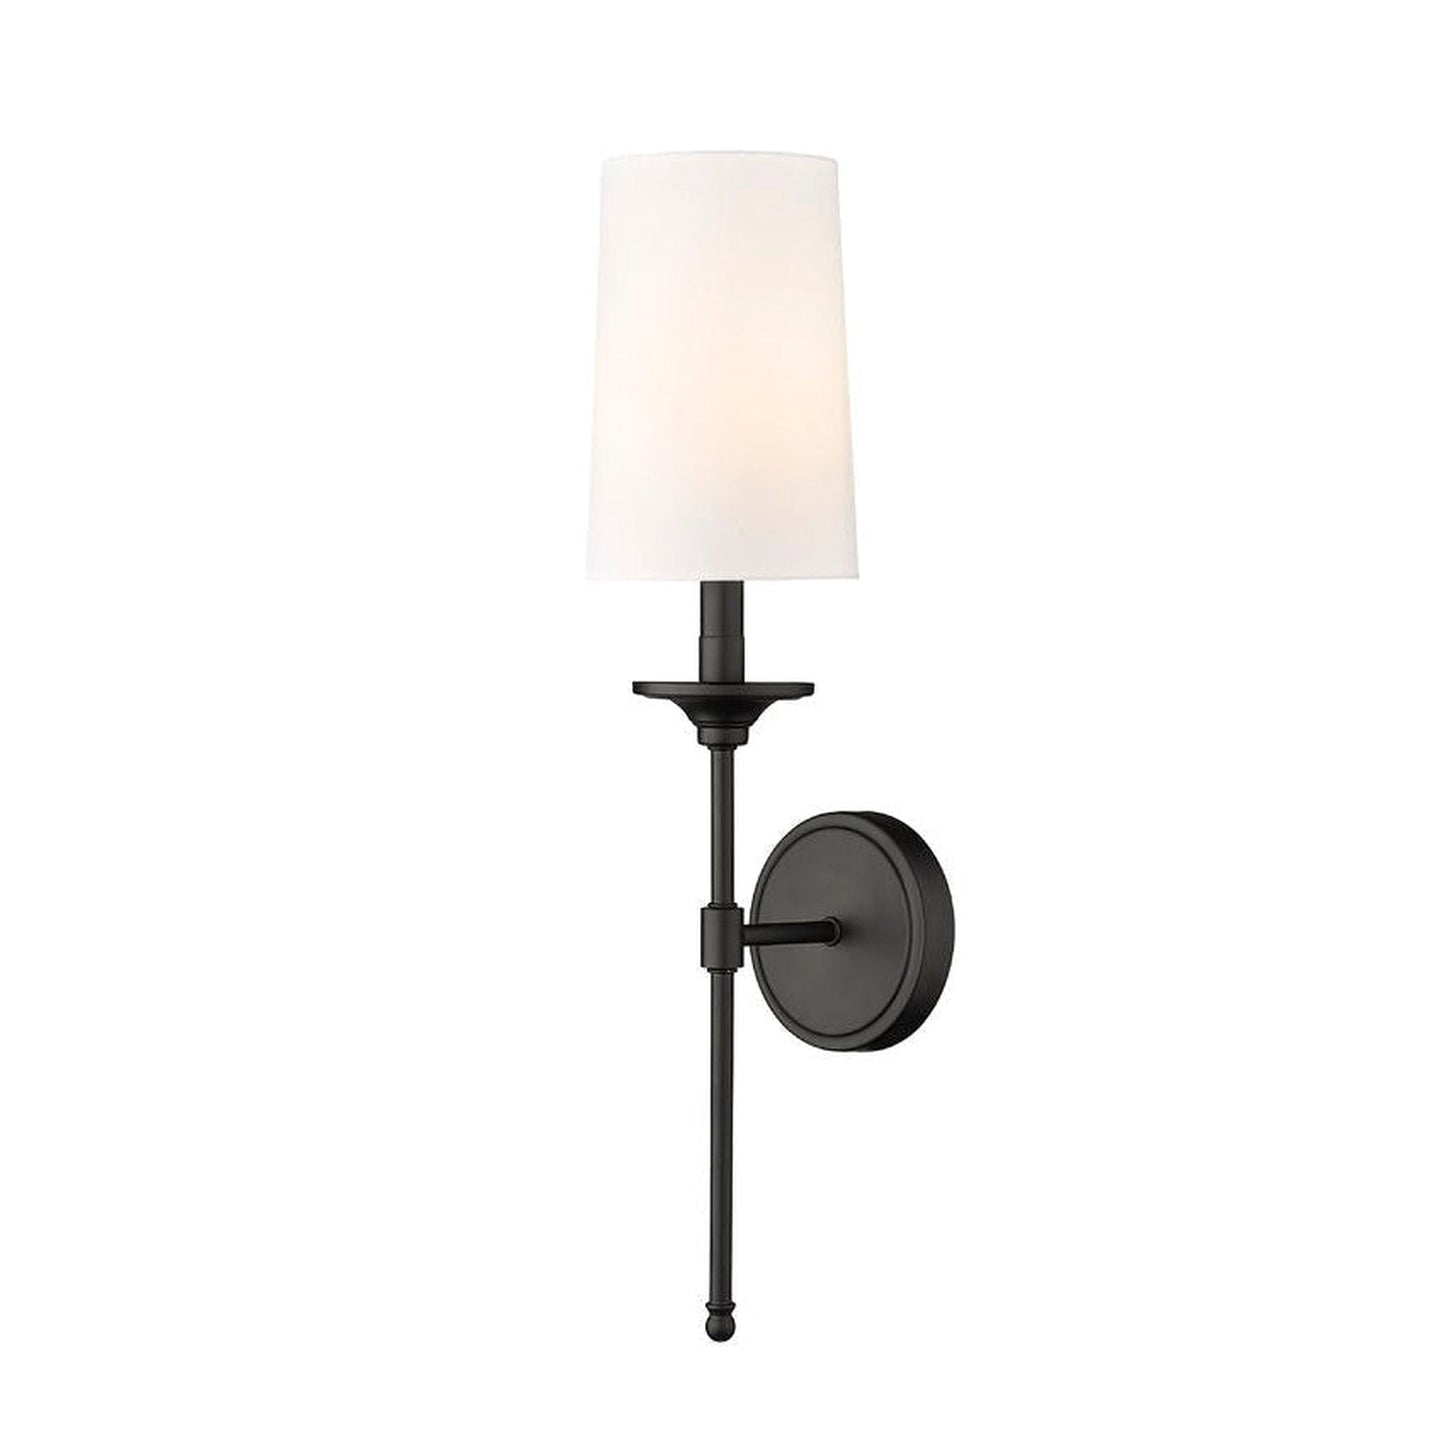 Z-Lite Emily 6" 1-Light Matte Black Wall Sconce With Off-White Cloth Shade